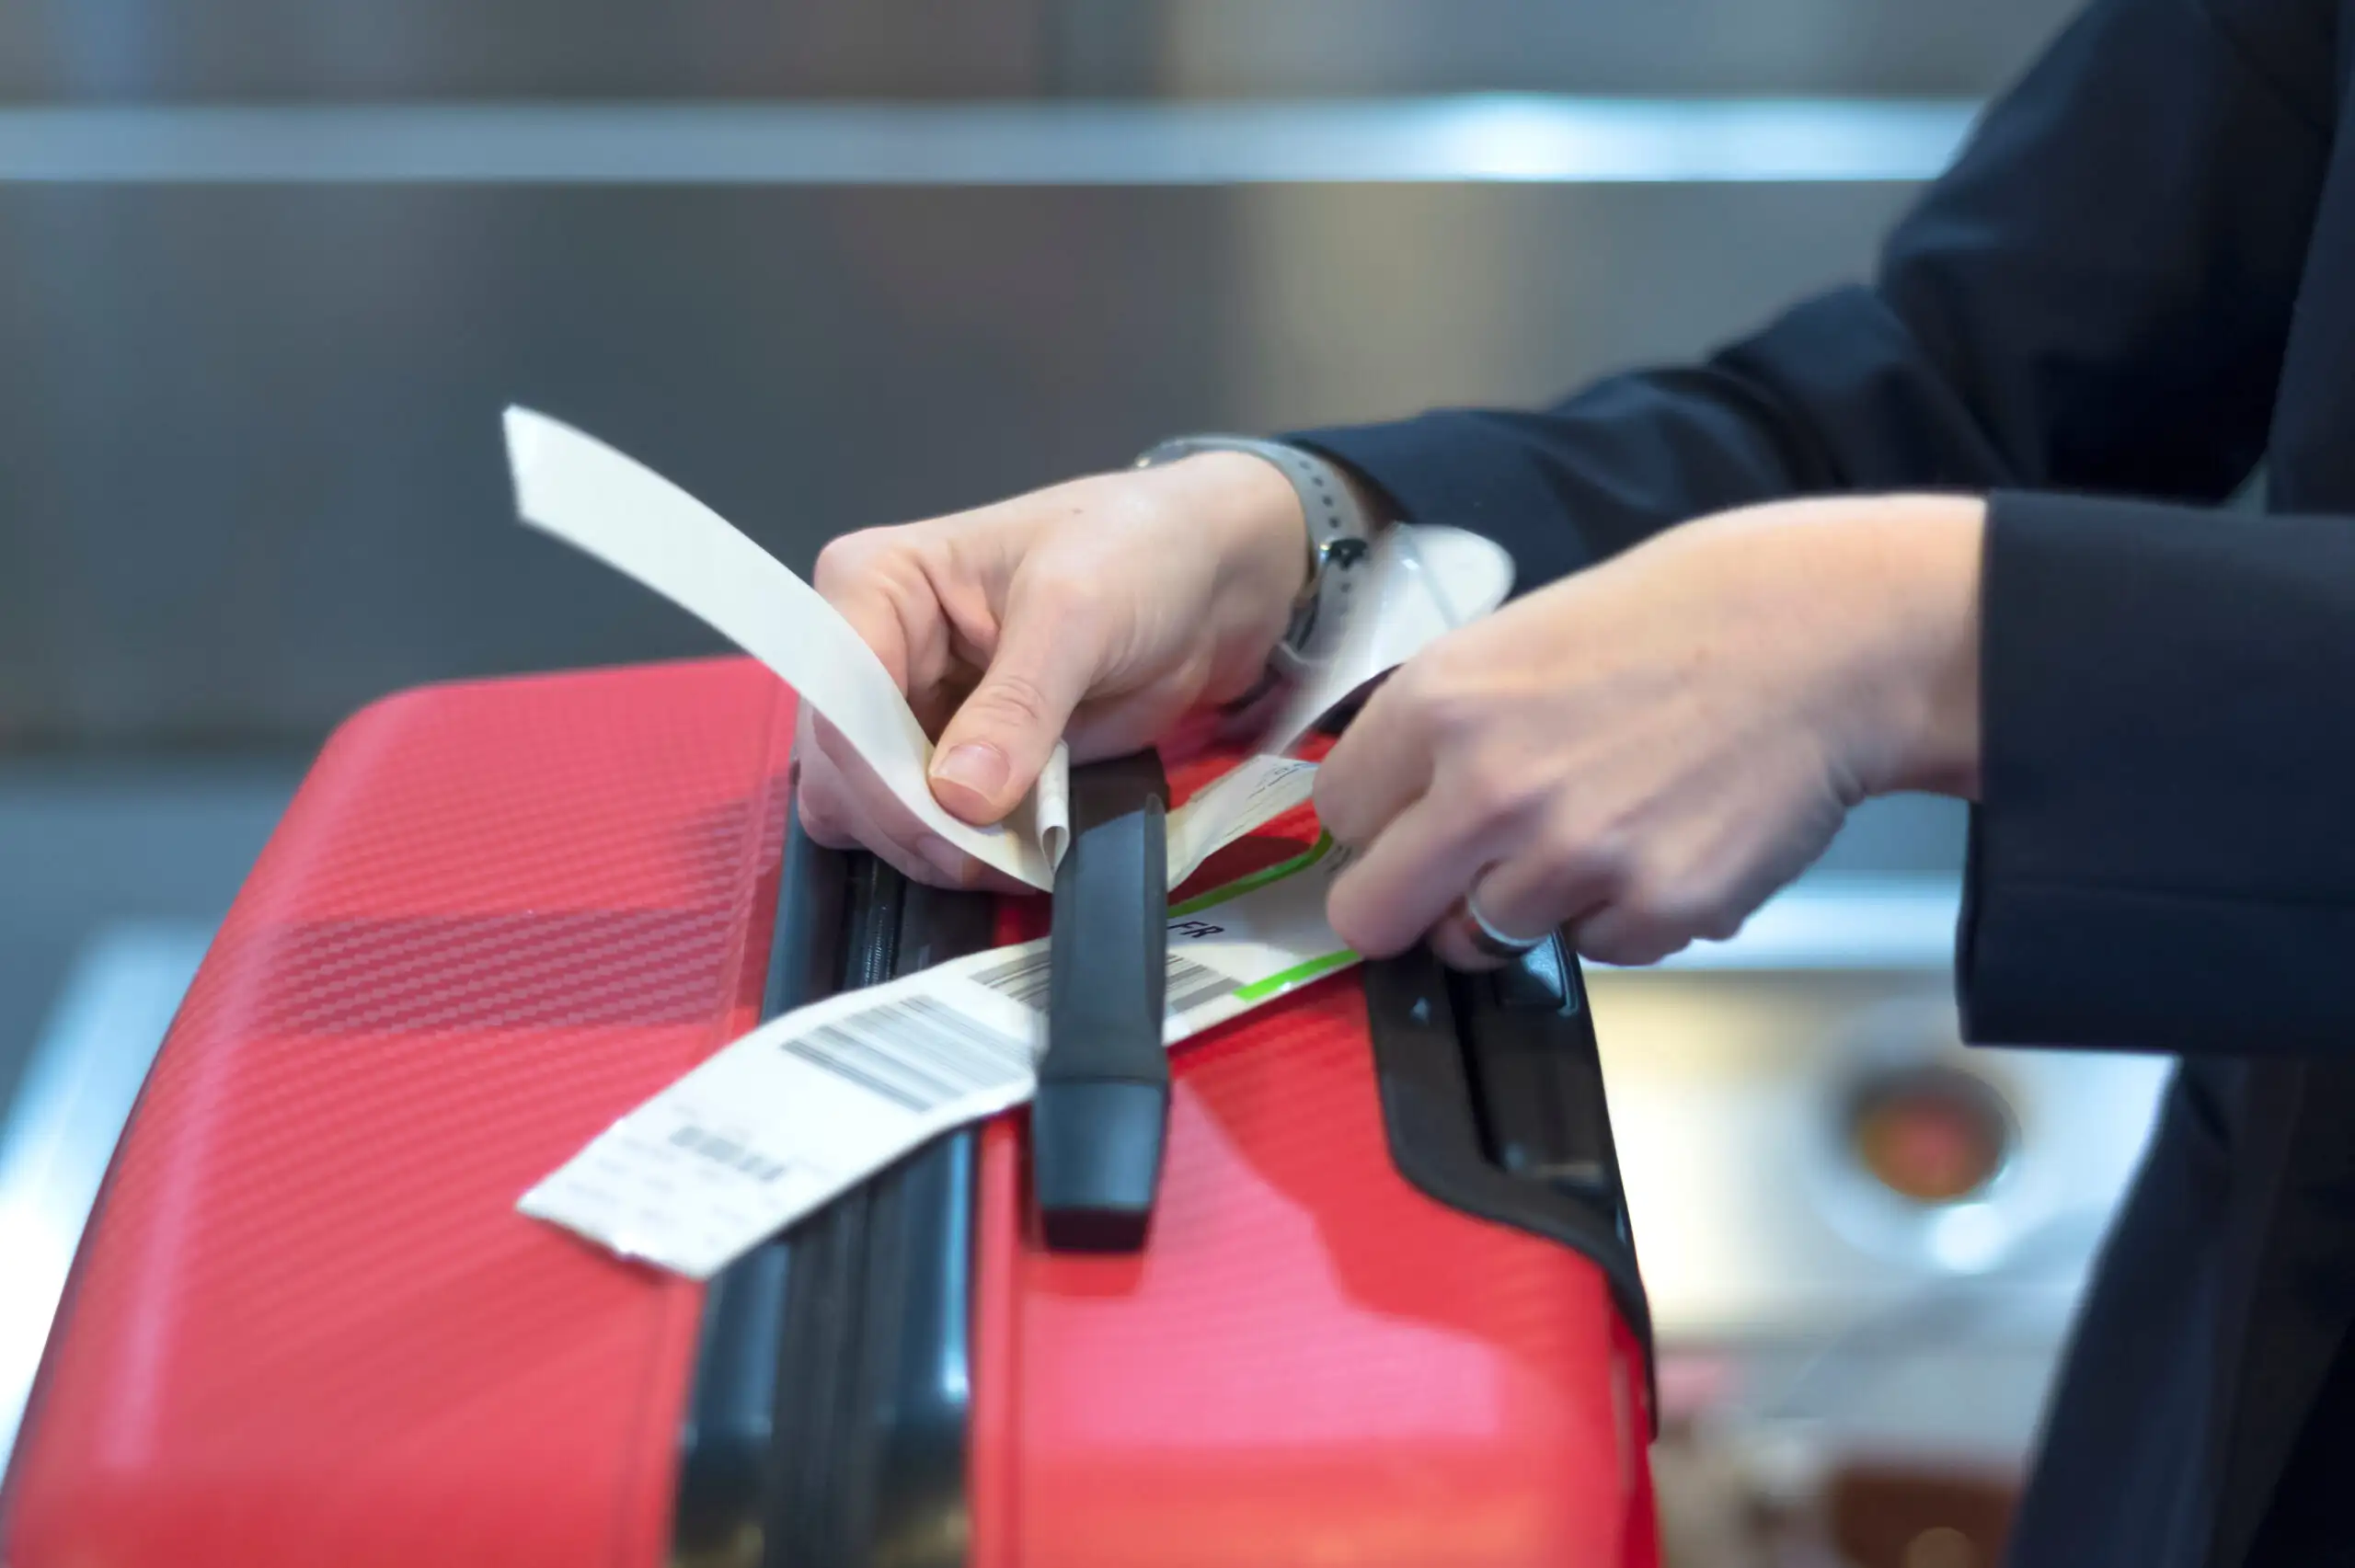 Close up of person adding a luggage tag to their red suitcase in an airport